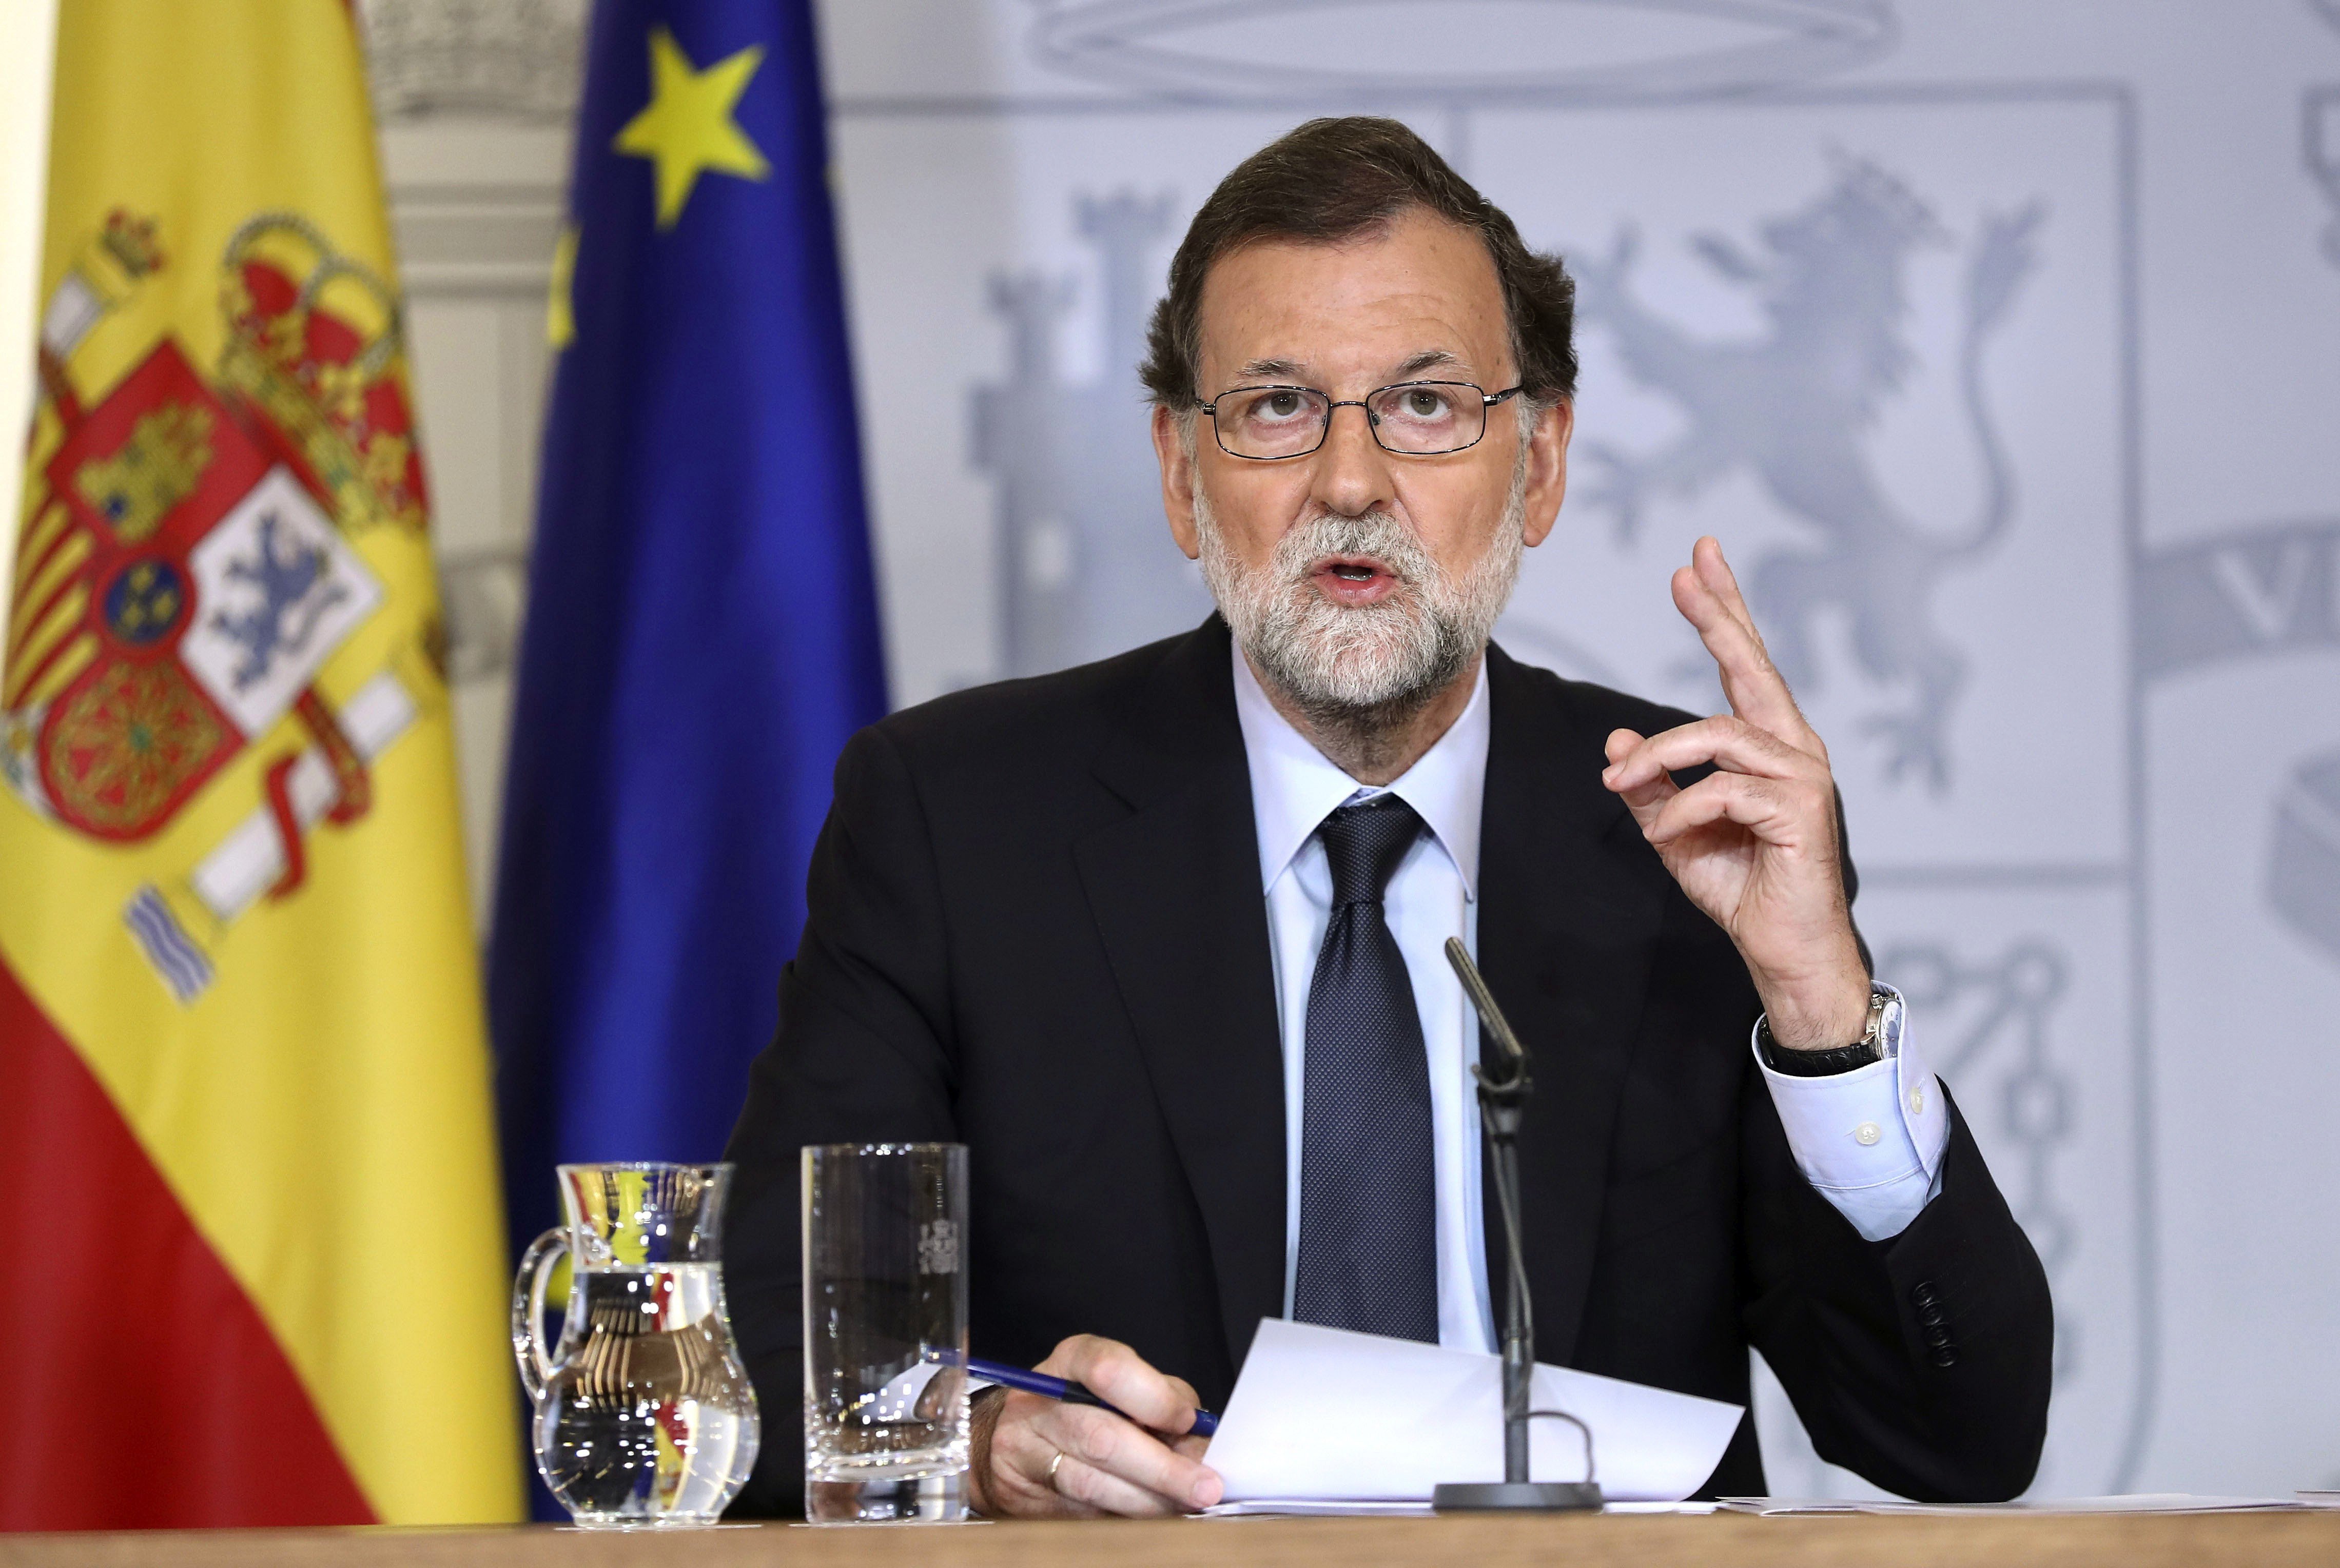 Rajoy tries to defend Spain's reaction following the Catalonia attacks